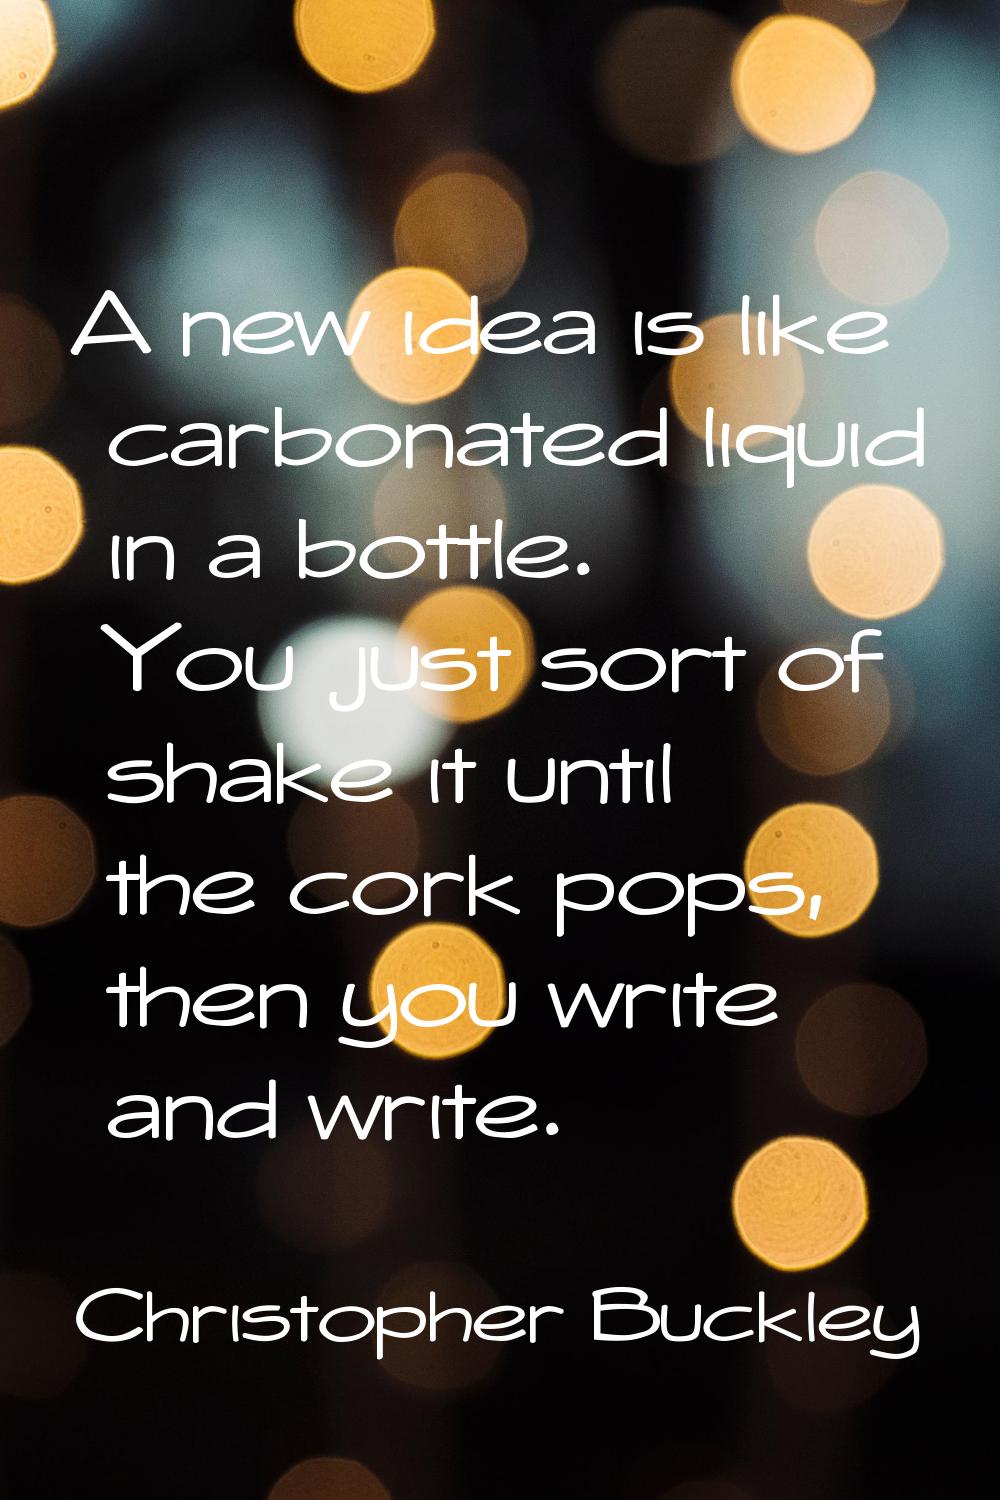 A new idea is like carbonated liquid in a bottle. You just sort of shake it until the cork pops, th